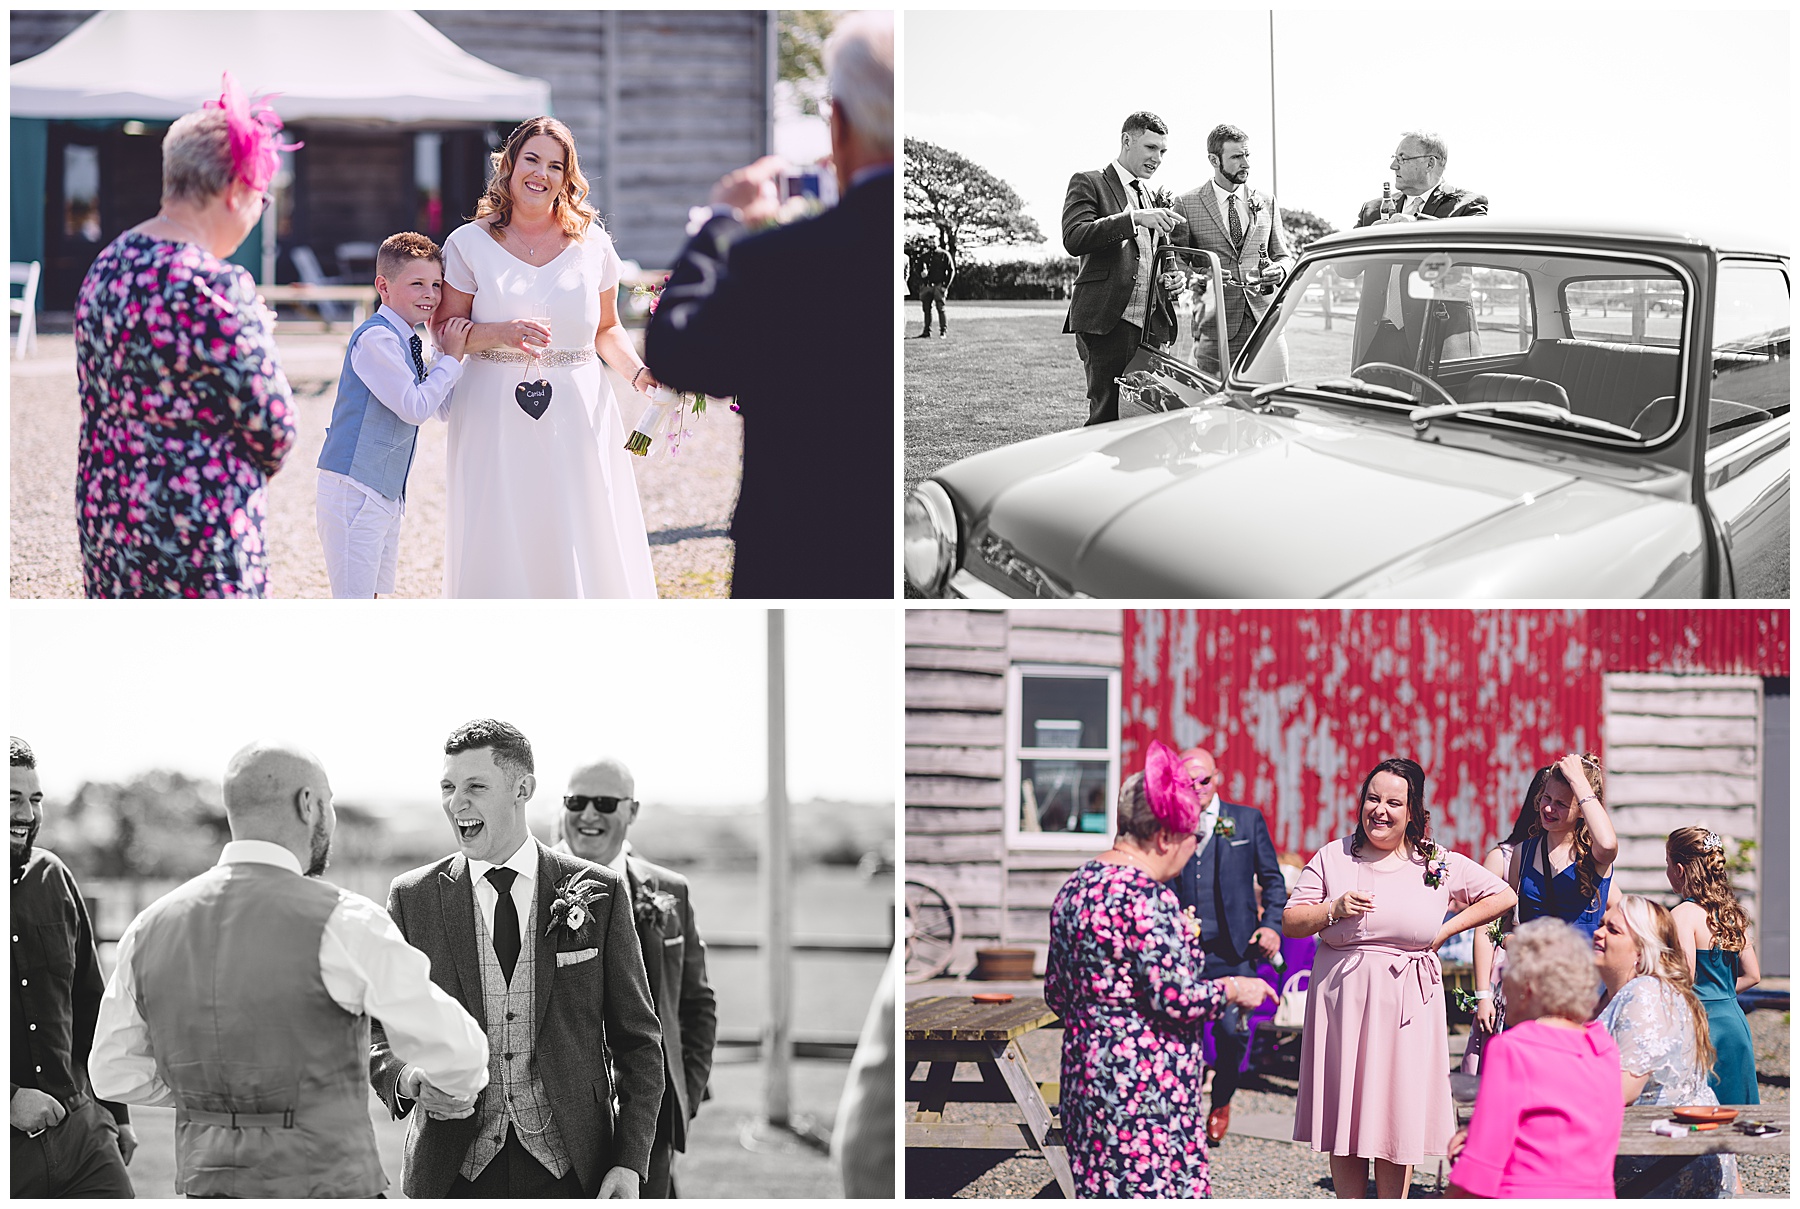 Wedding guests at Woodhouse Barn